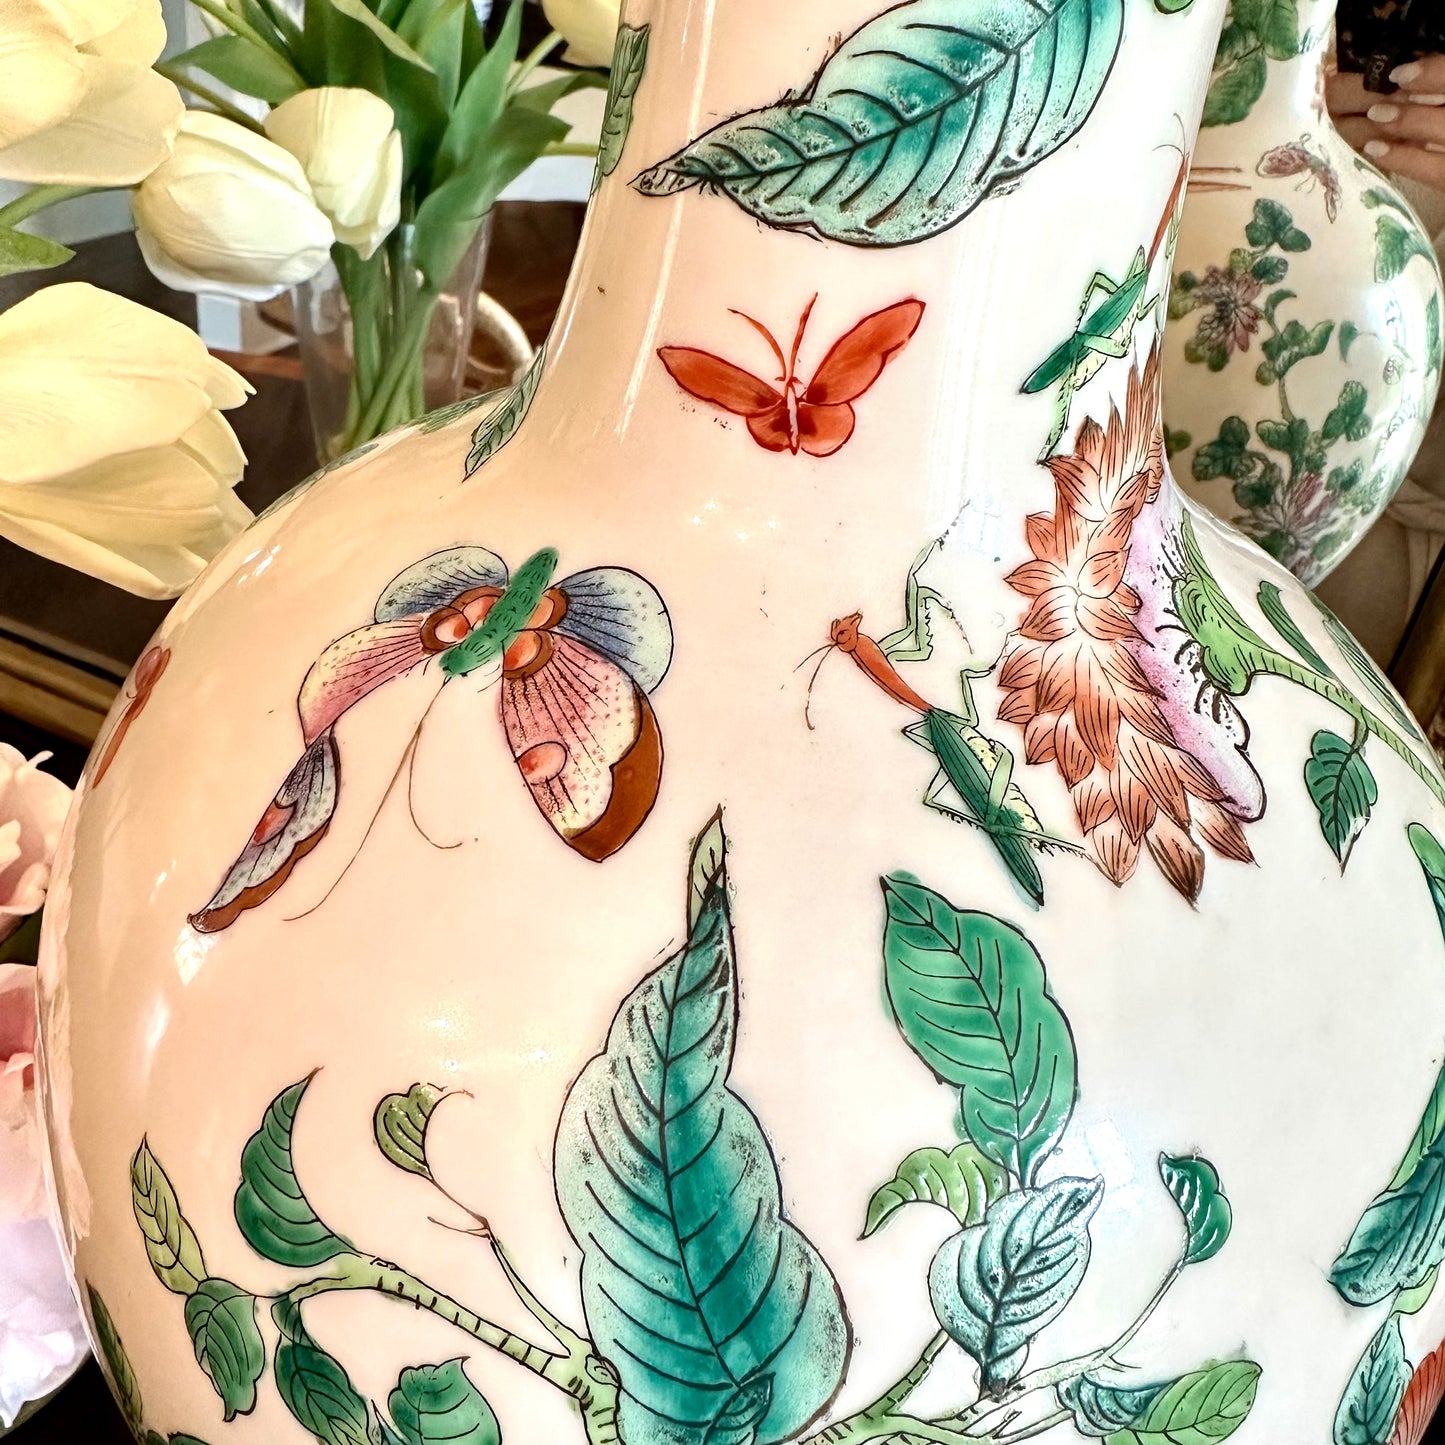 Fabulous Large Pale Pink Chinese Long Neck Vase w Birds on Stand